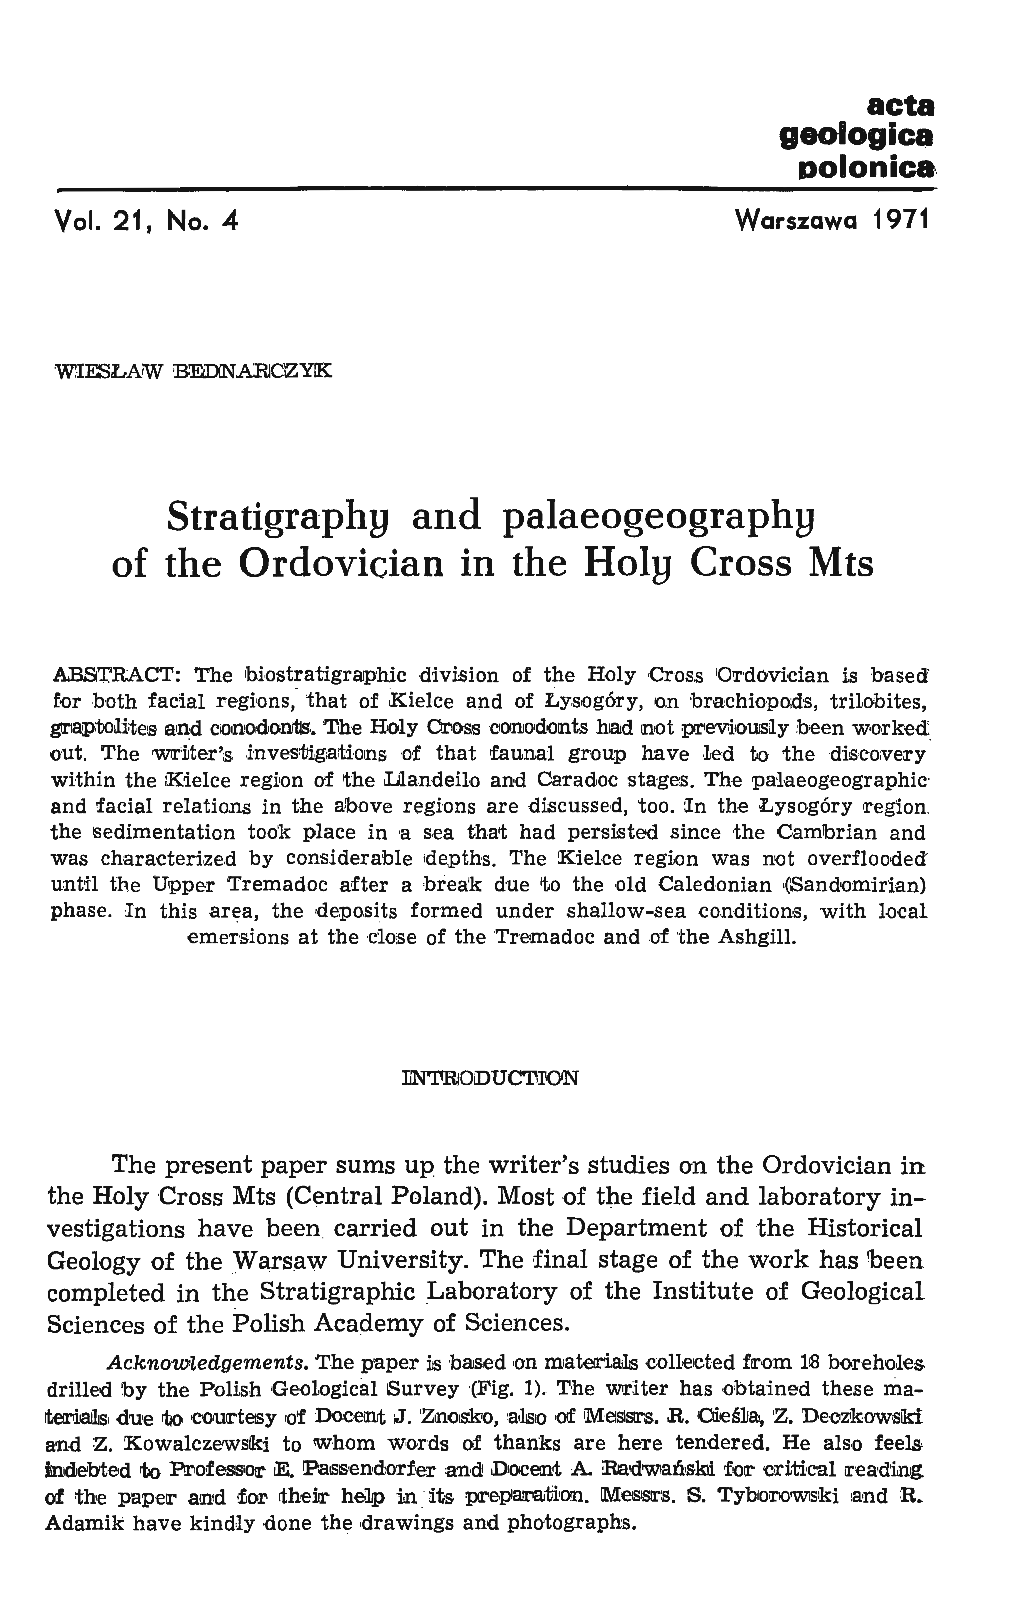 Stratigraphg and Palaeogeographg of the Ordovician in the Holy Cross Mts